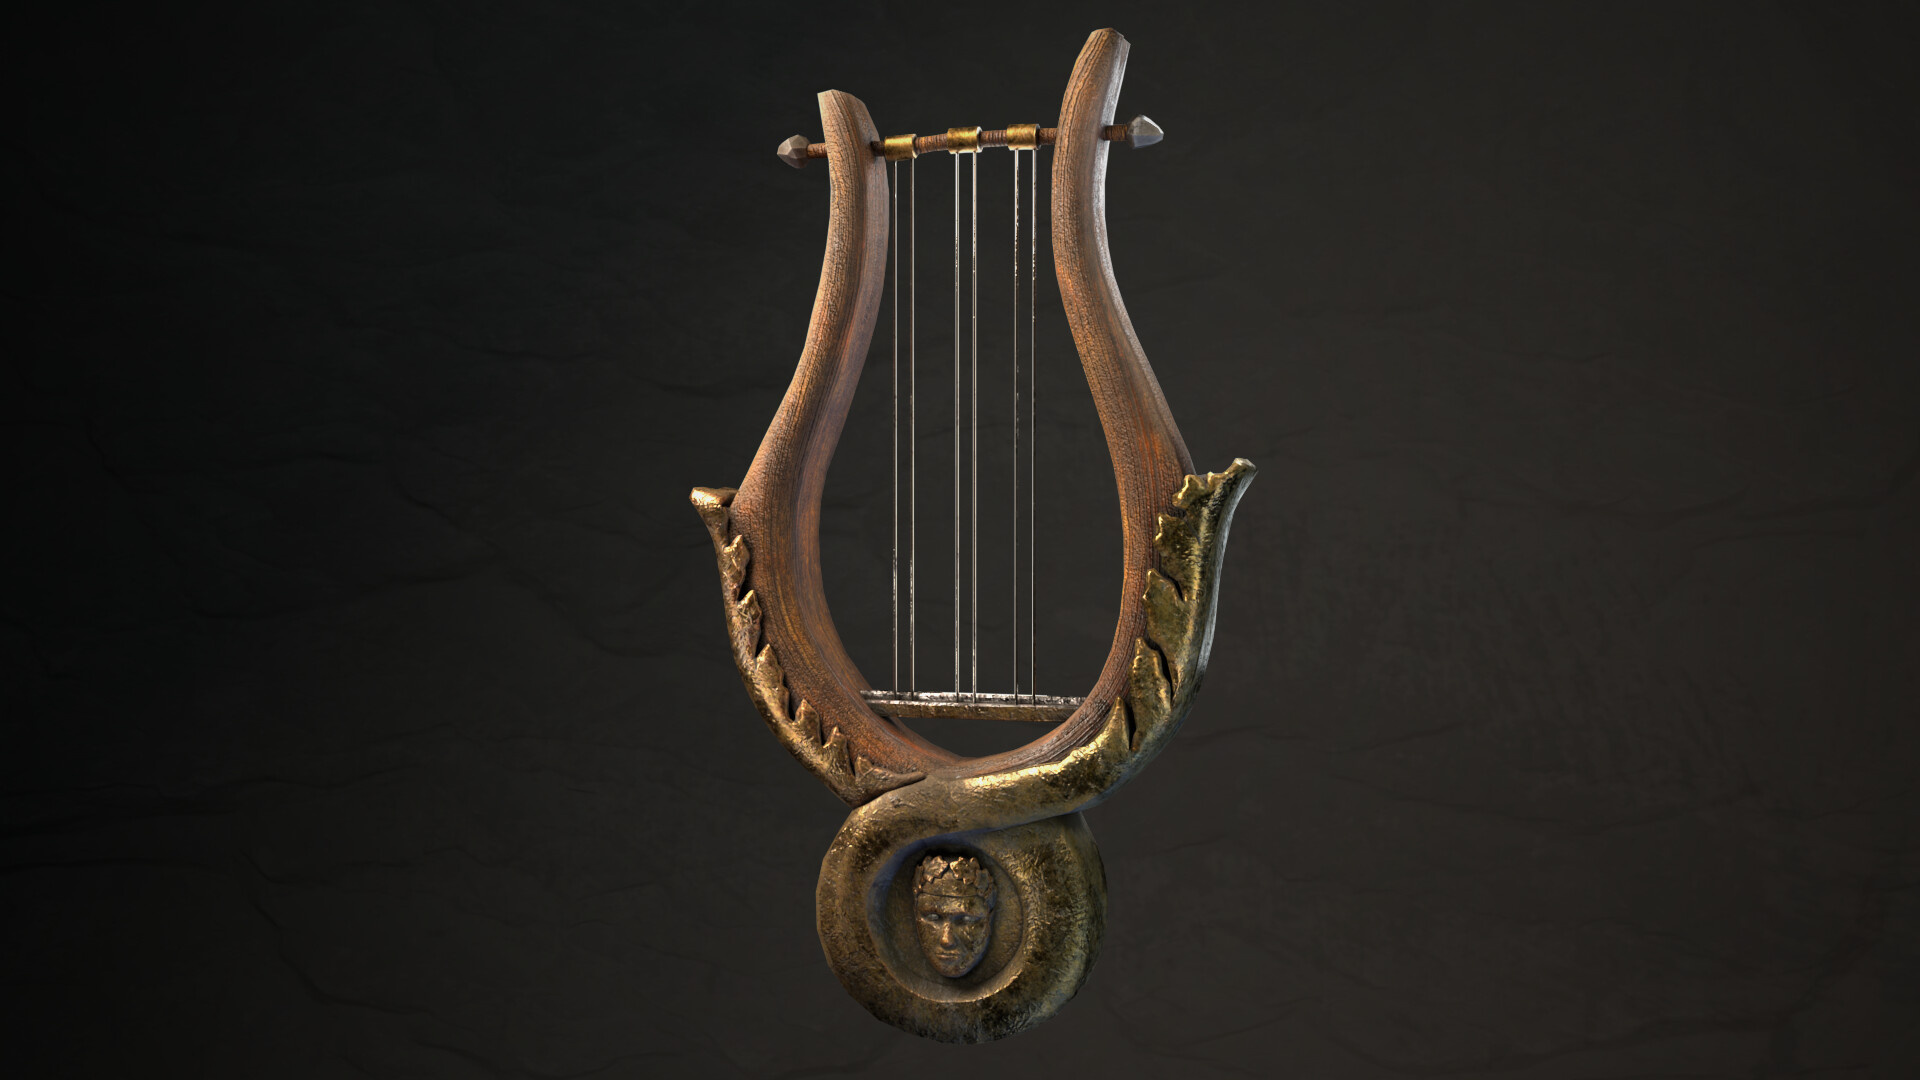 Lyre: Ancient Greece, Wood And Bronze, The Yoke Lutes Family, Wooden Musical Instrument. 1920x1080 Full HD Wallpaper.